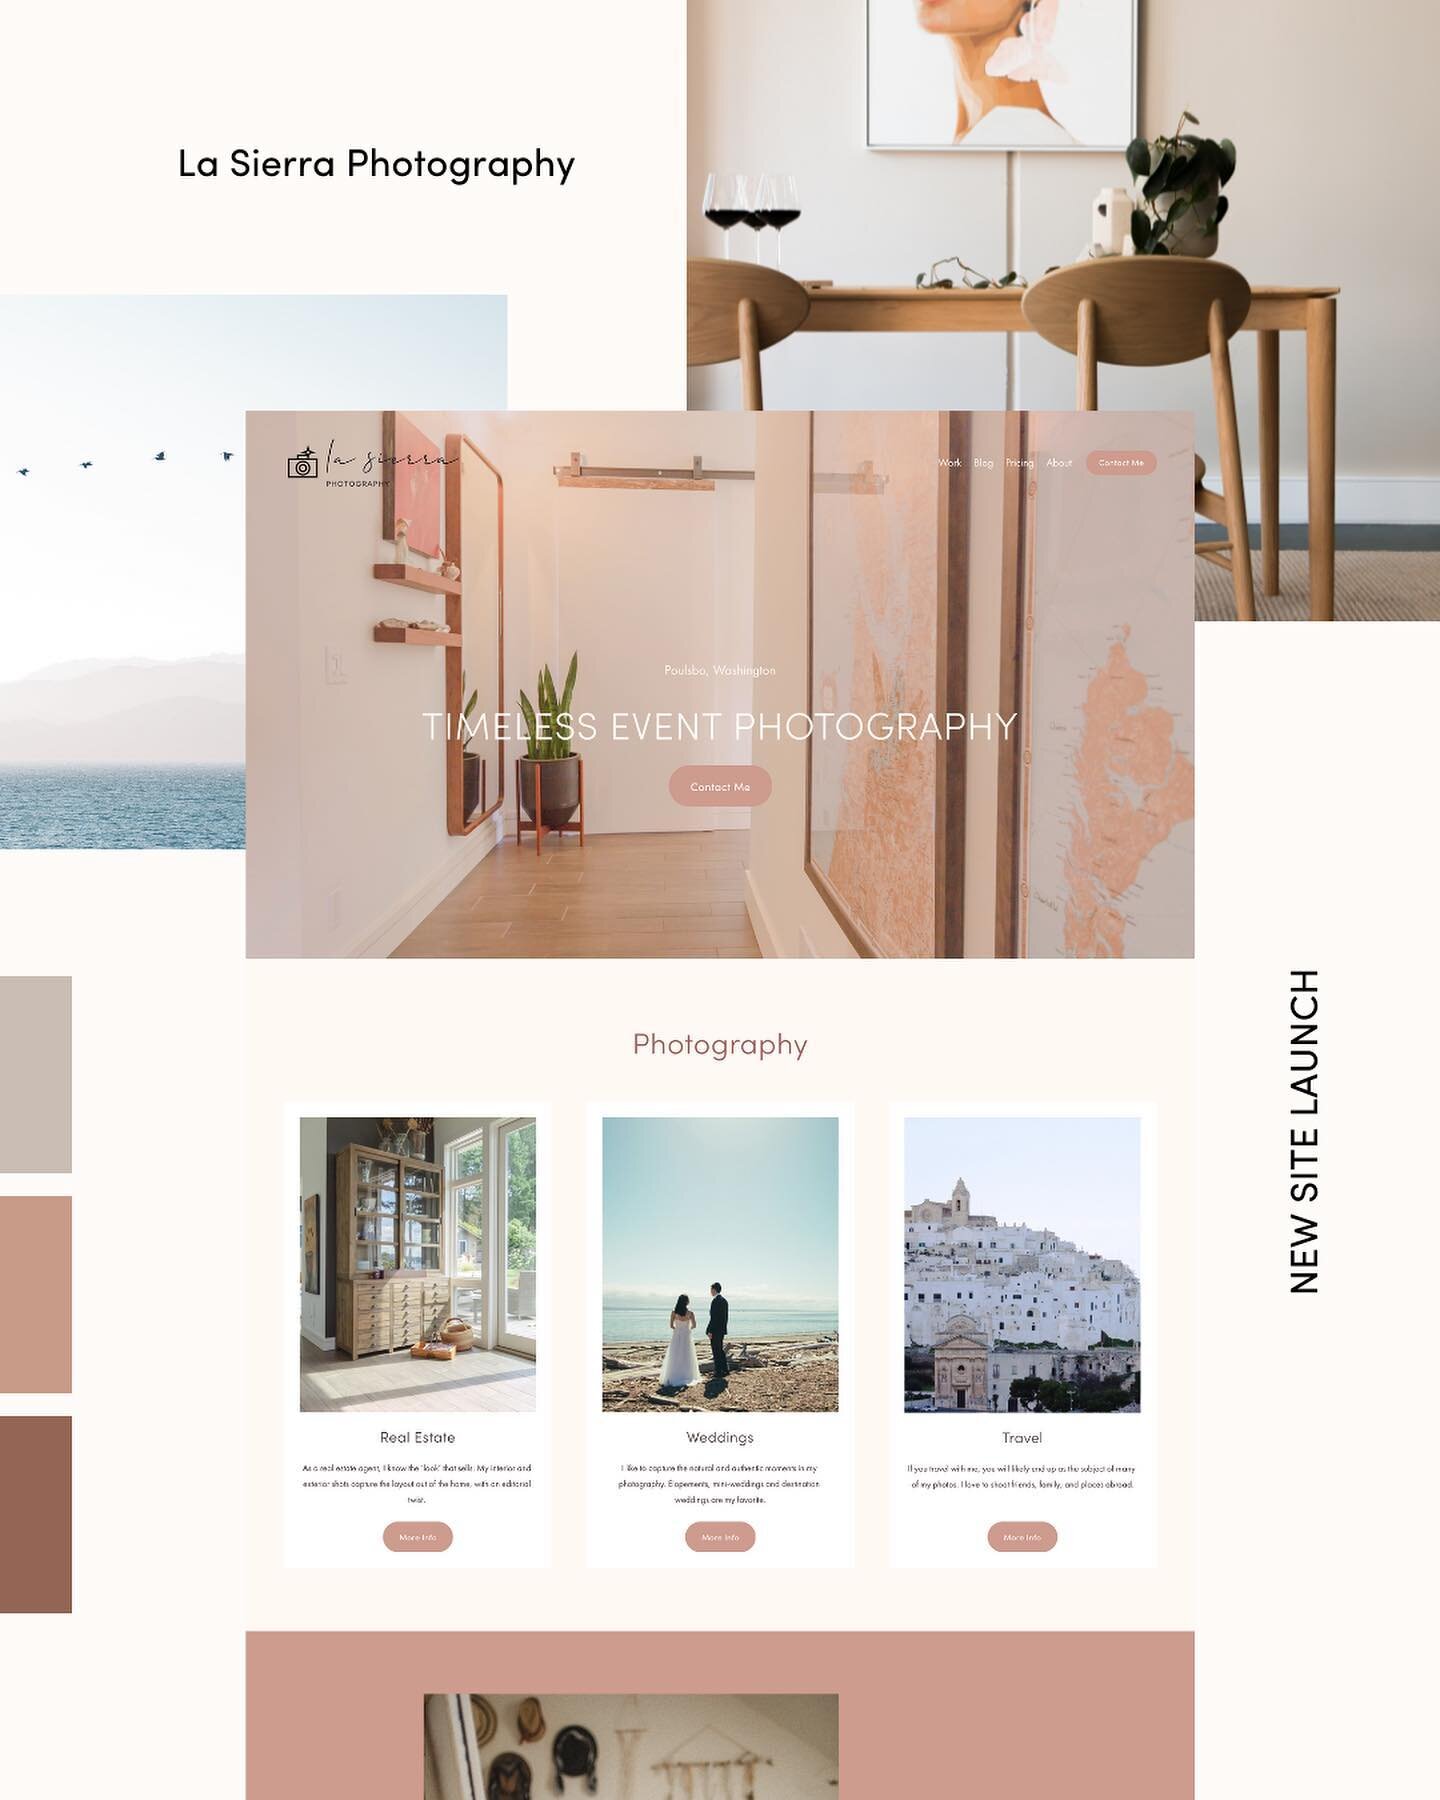 ✨New site launch✨

This photography client wanted to combine her real estate, wedding and travel photography on one site, and requested an overall redesign using earthy tones and a minimal approach.